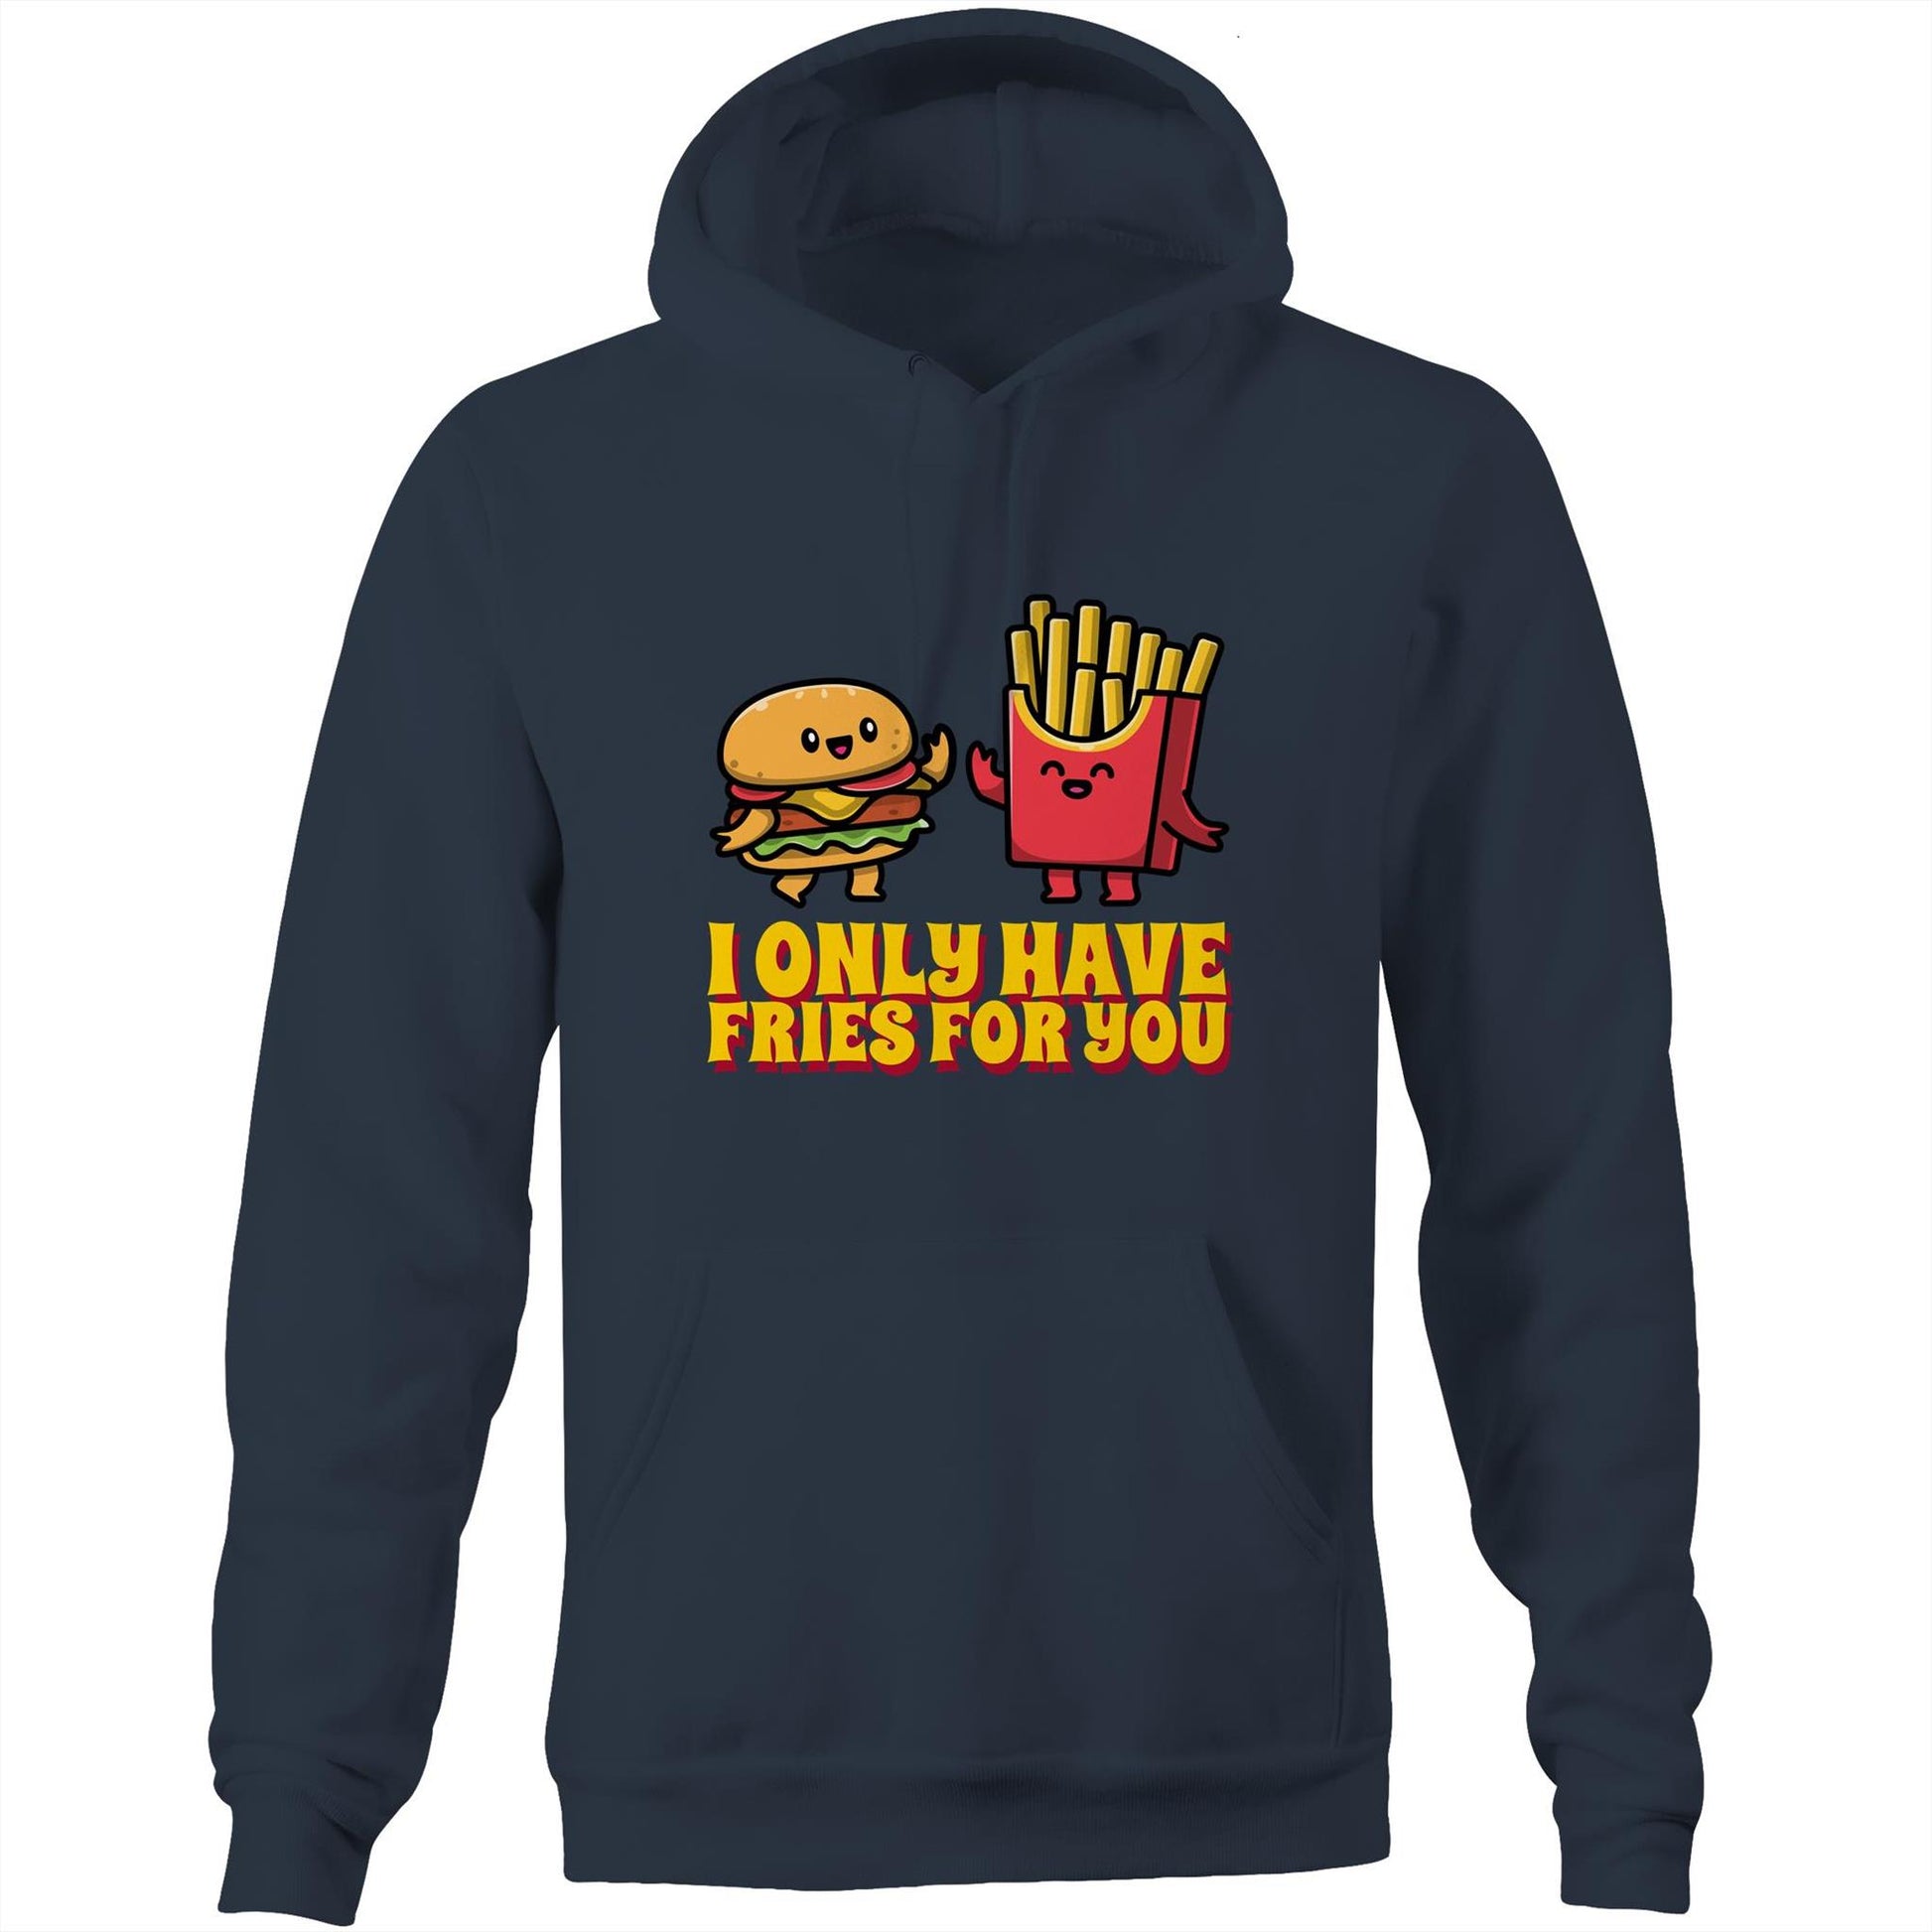 I Only Have Fries For You, Burger And Fries - Pocket Hoodie Sweatshirt Navy Hoodie